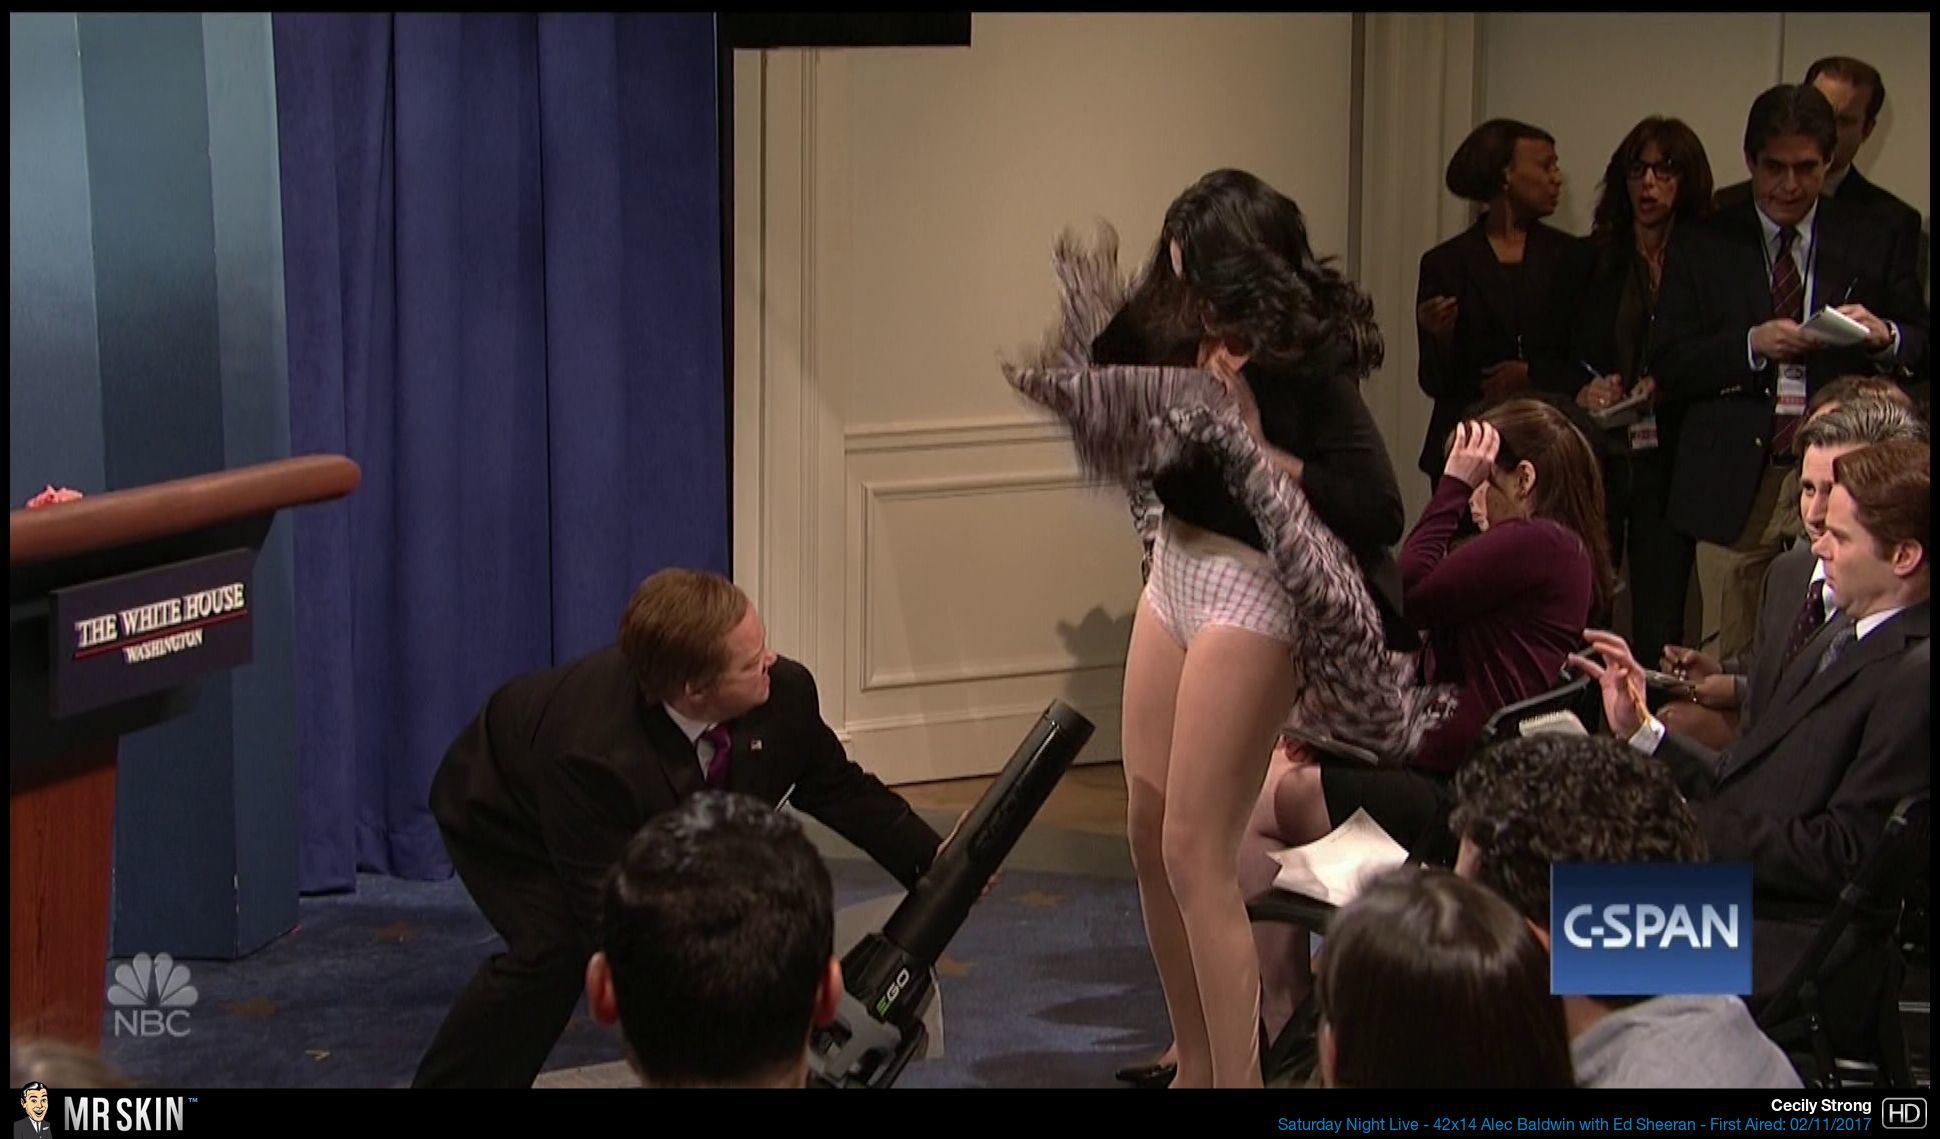 Cecily strong nudes